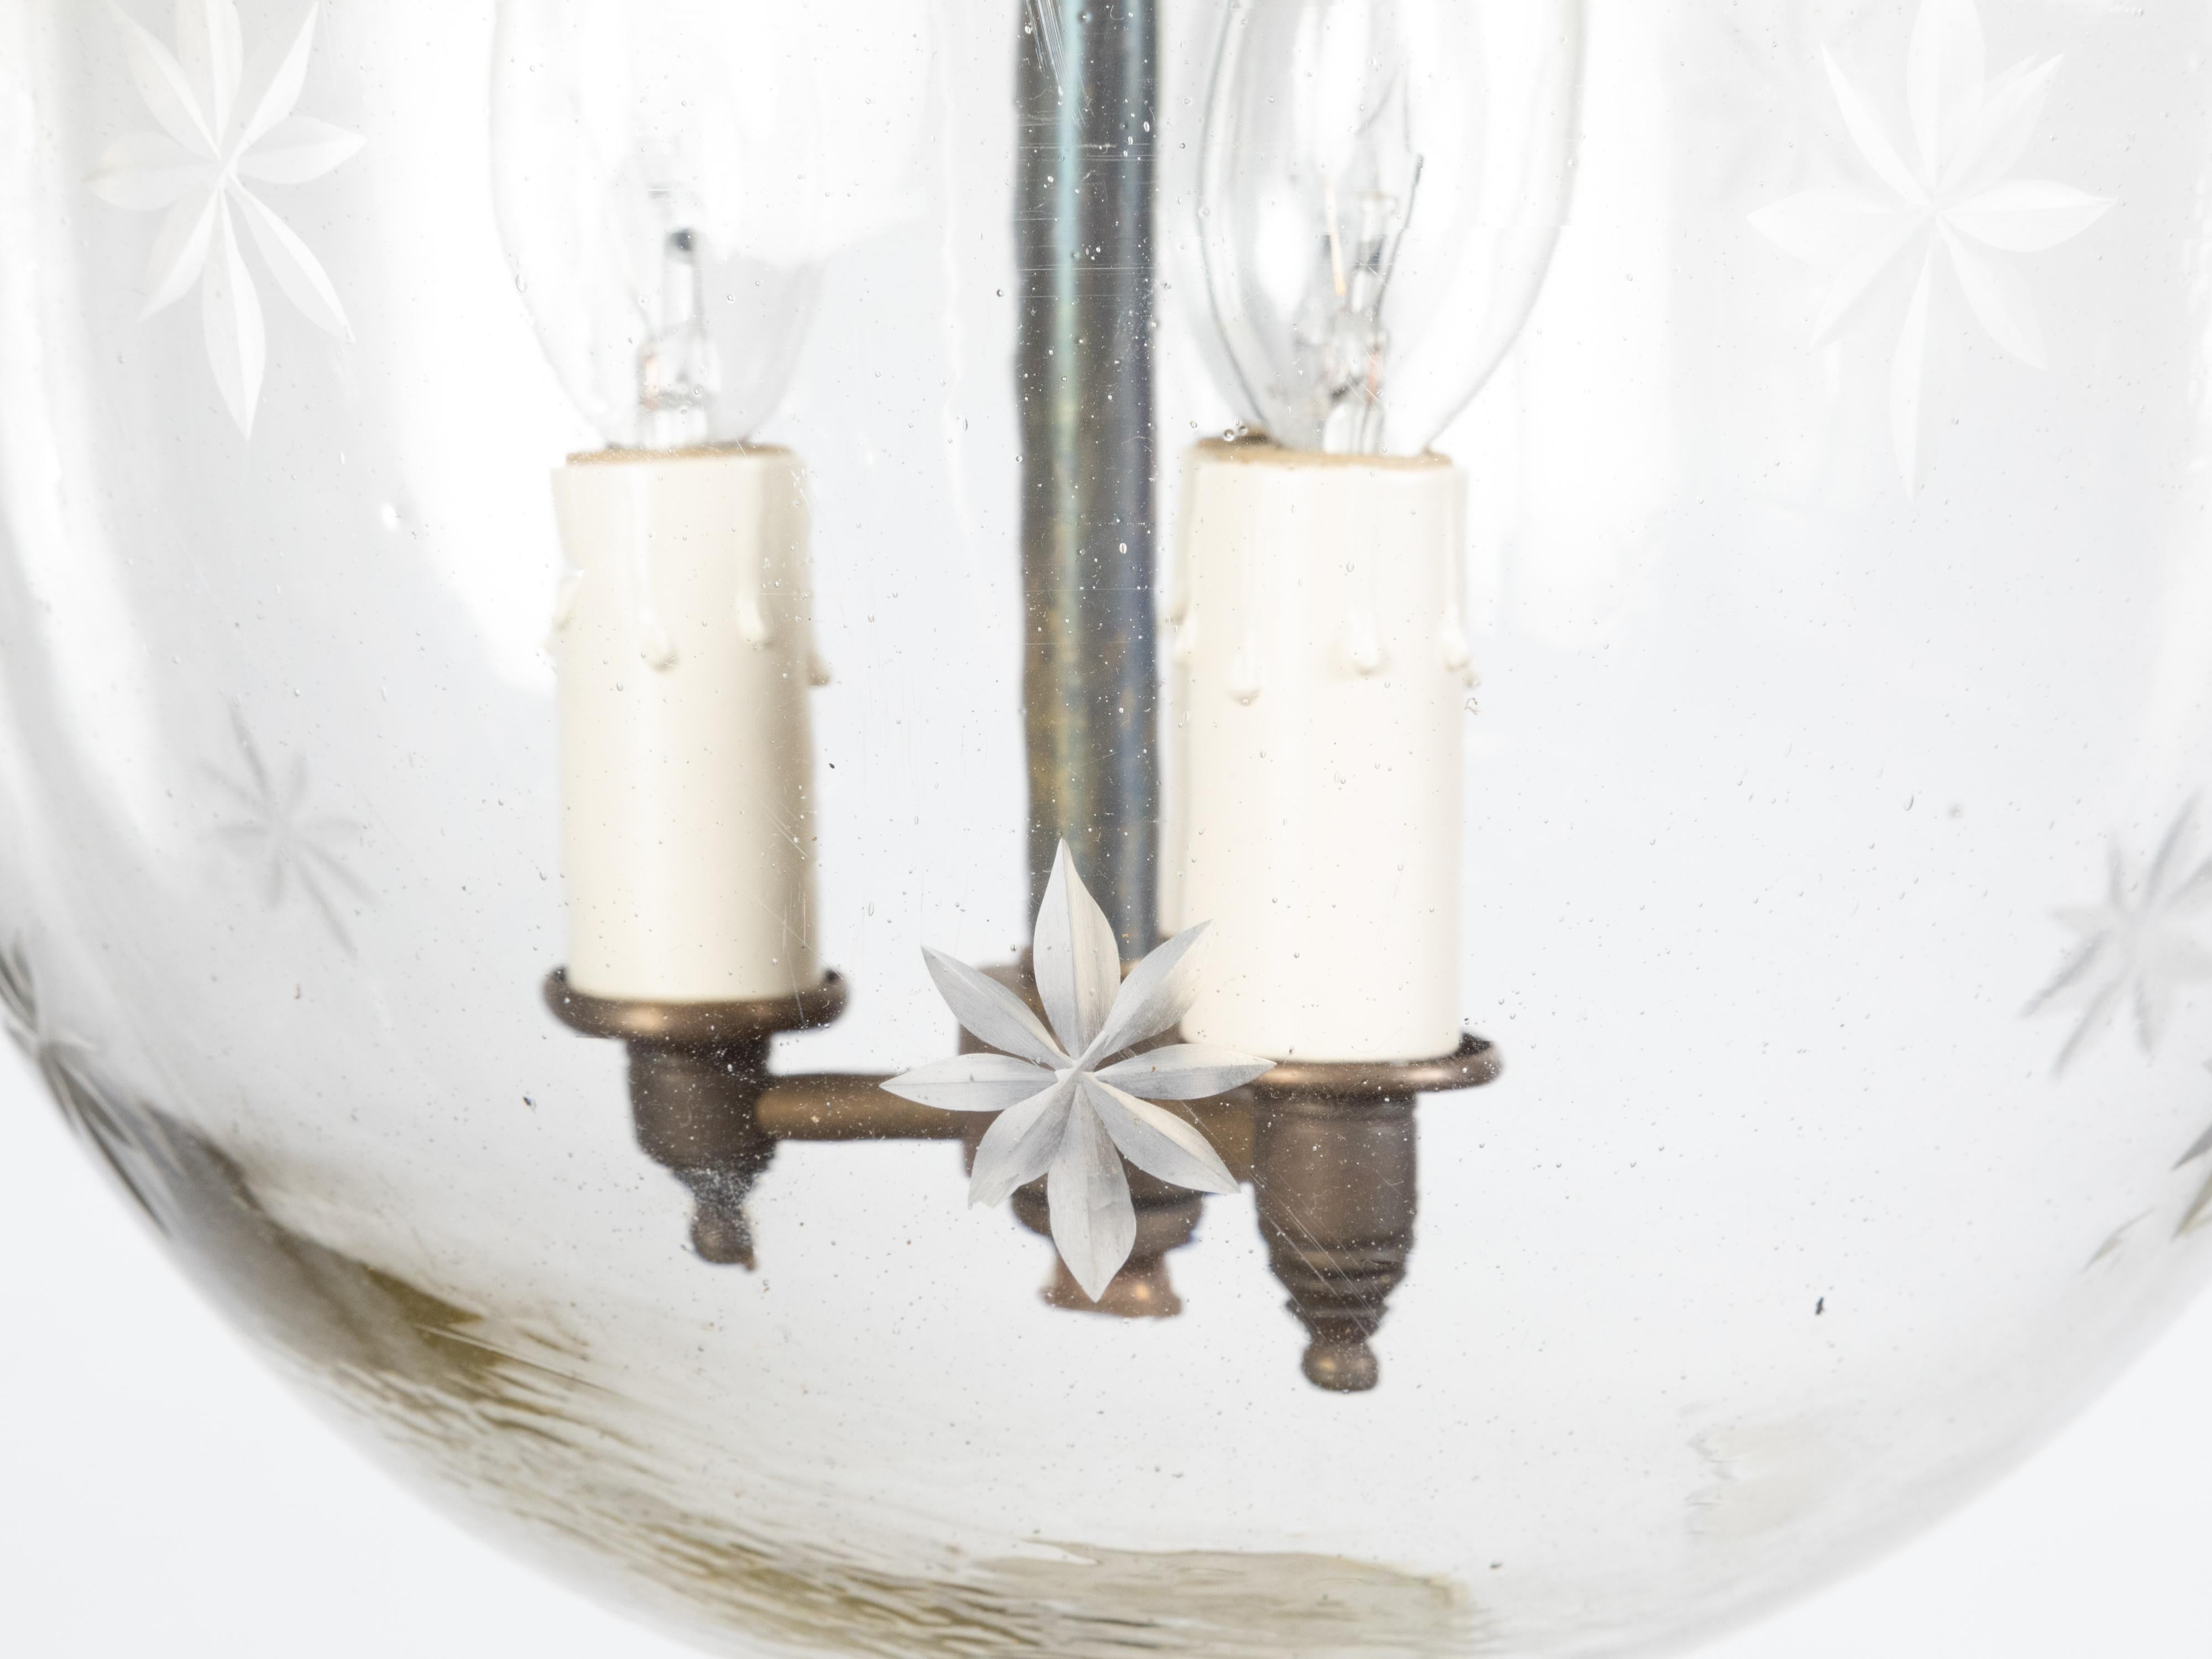 English 1900s Turn of the Century Bell Jar Light Fixture with Etched Stars For Sale 5